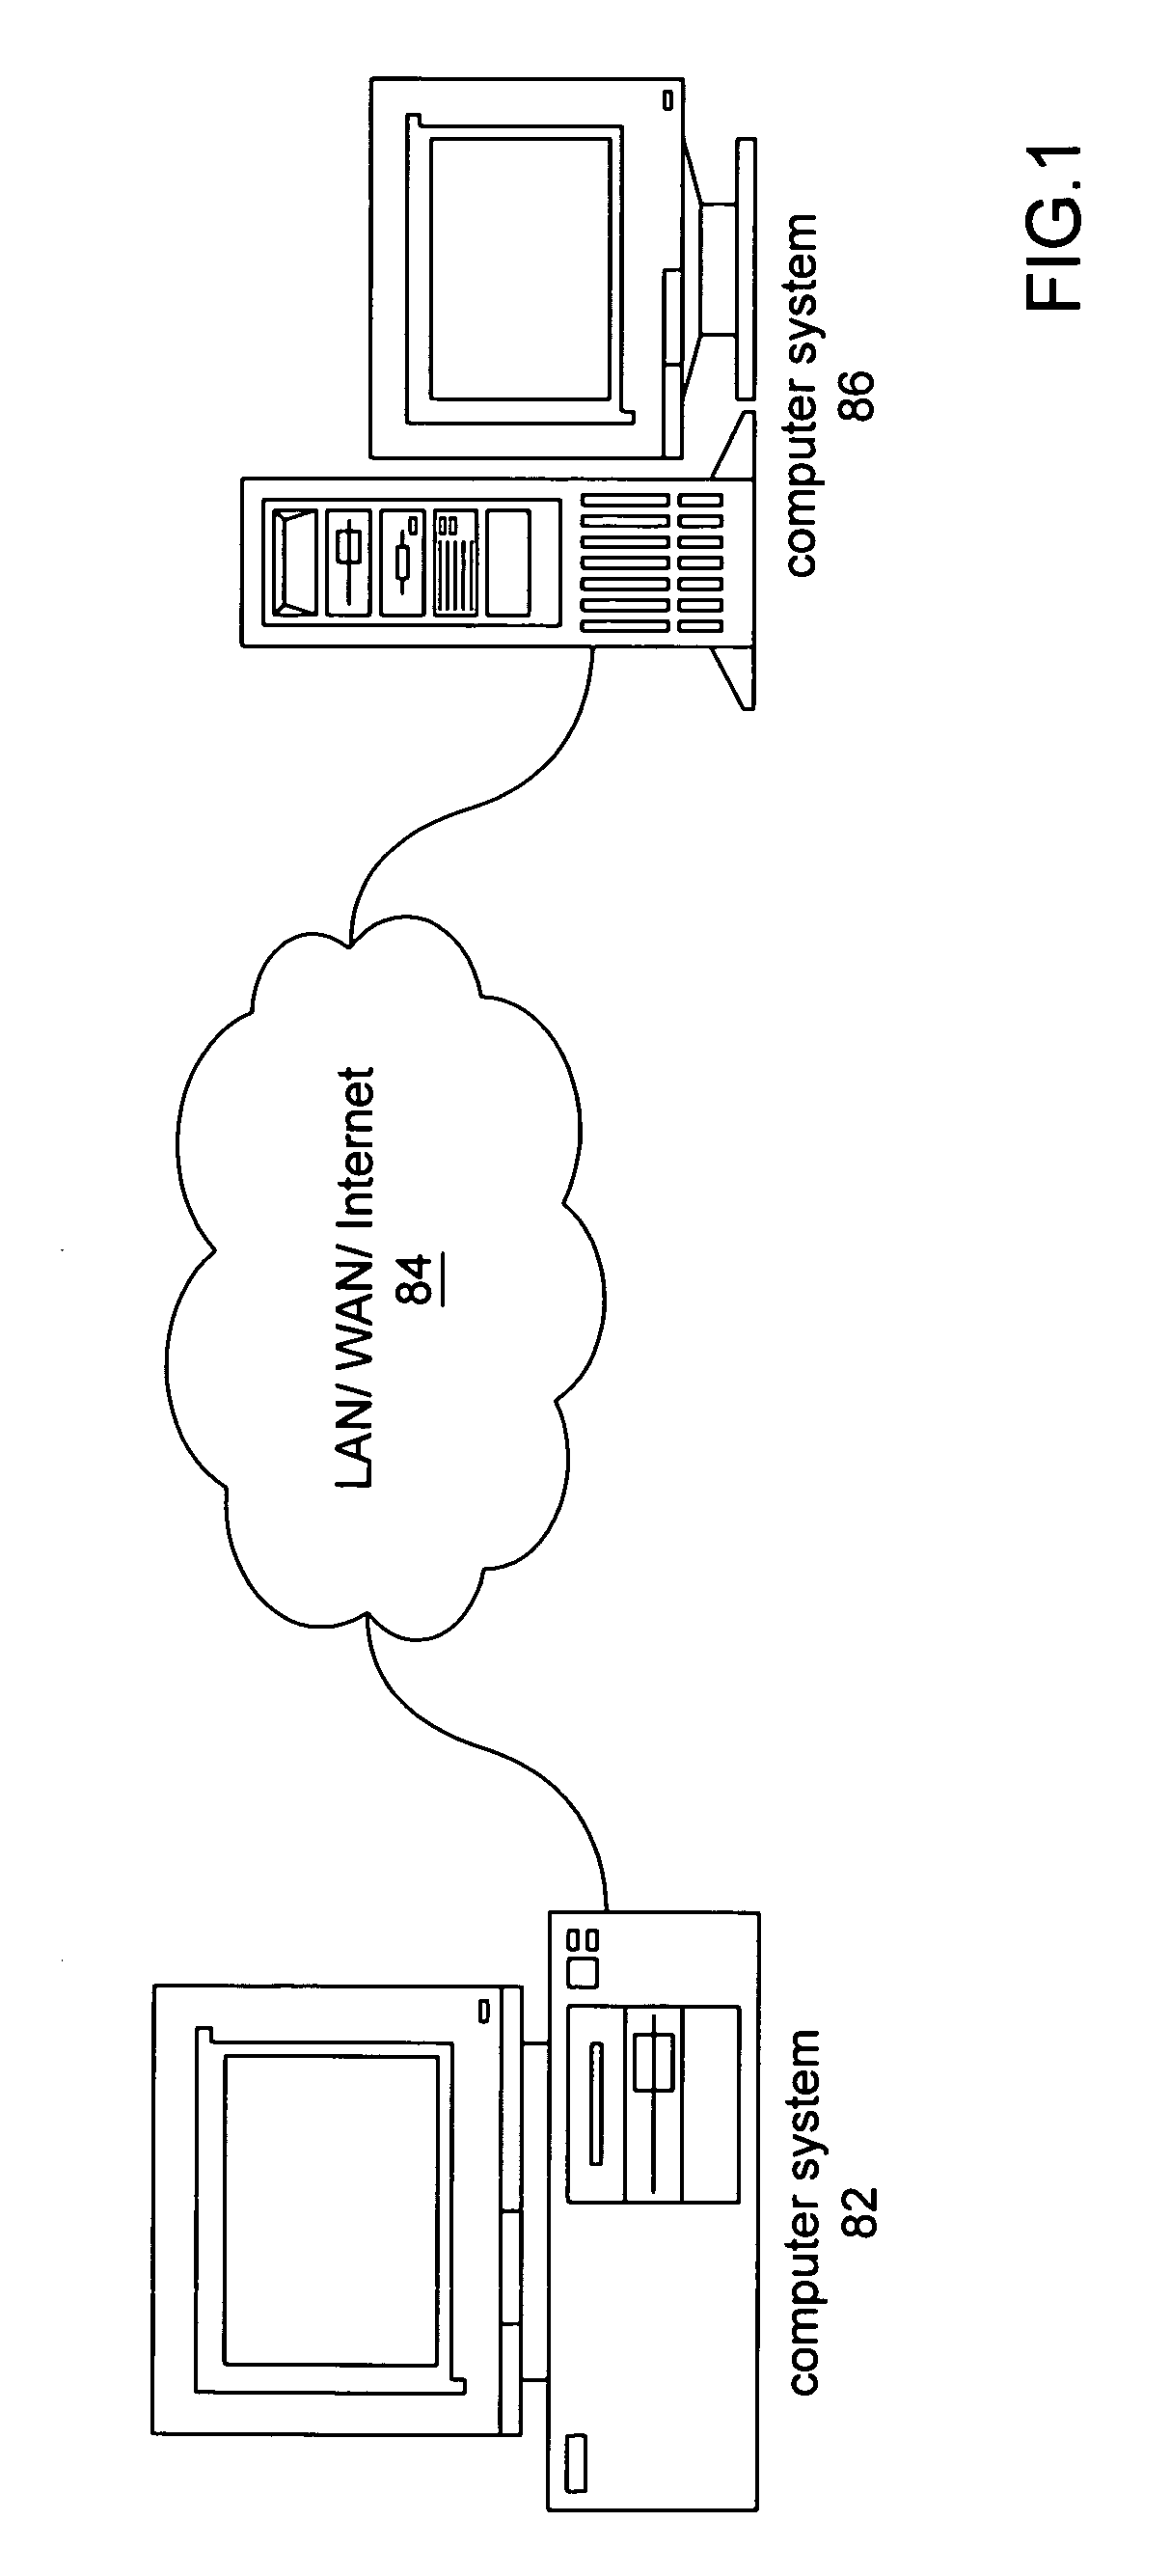 System and method for programmatically generating a graphical program in response to user input